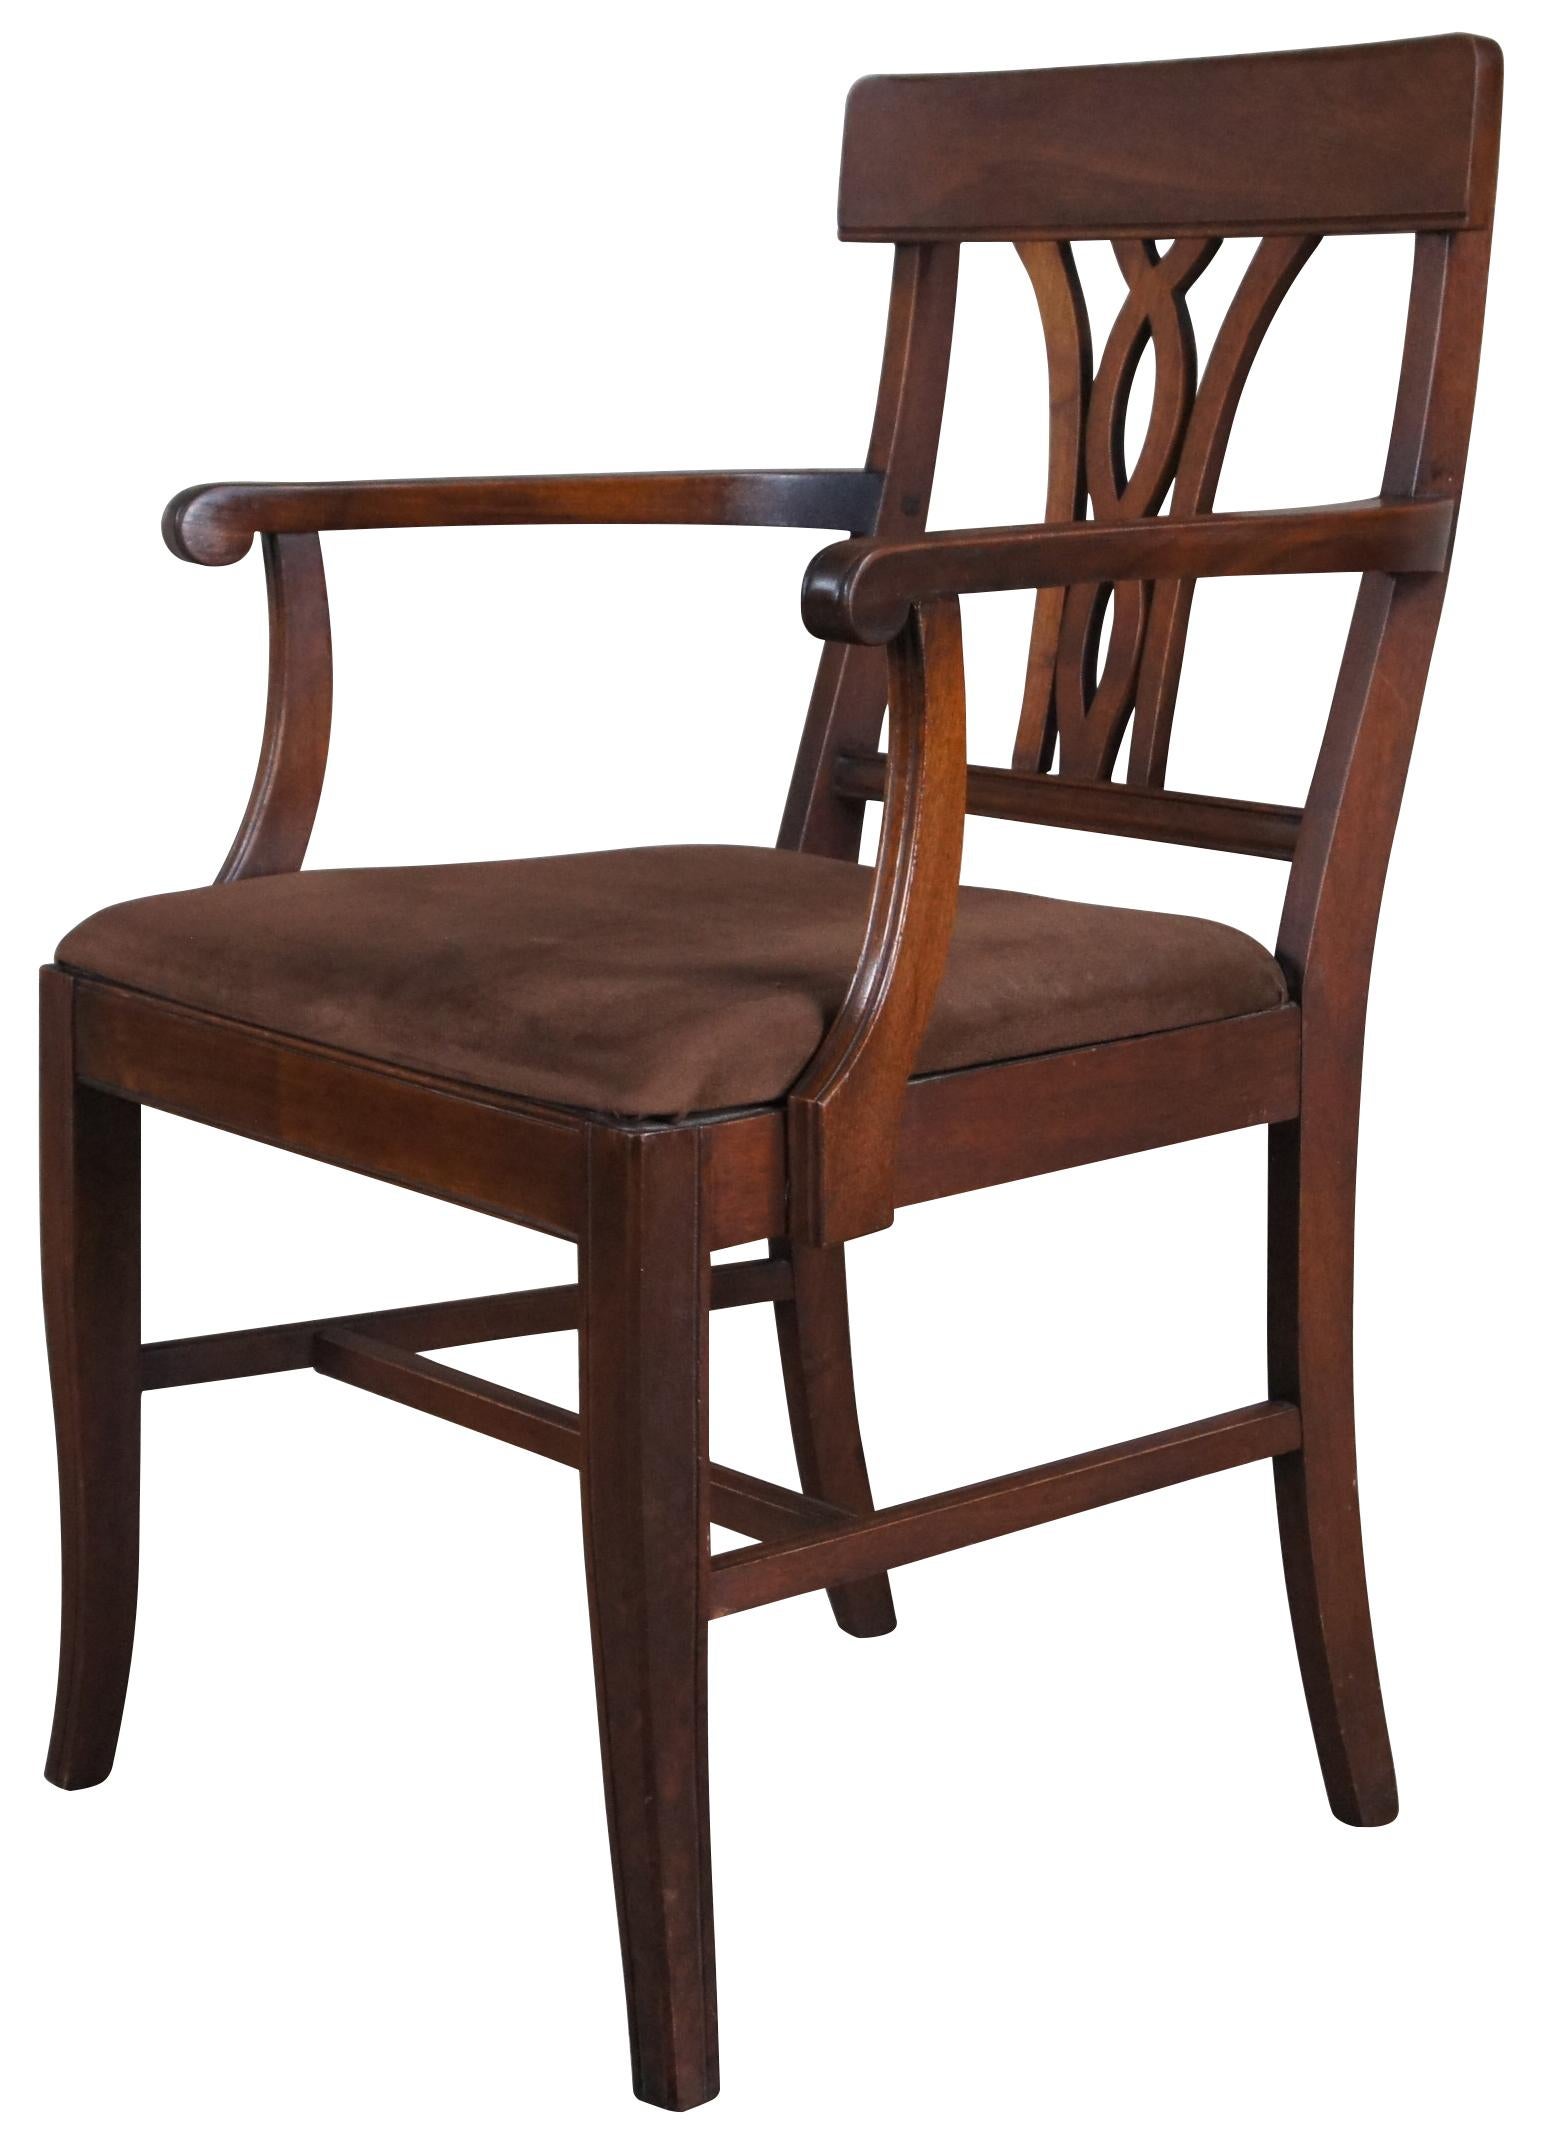 American Classical 6 American Antique Early 20th Century Walnut Dining Chairs Suede Seat